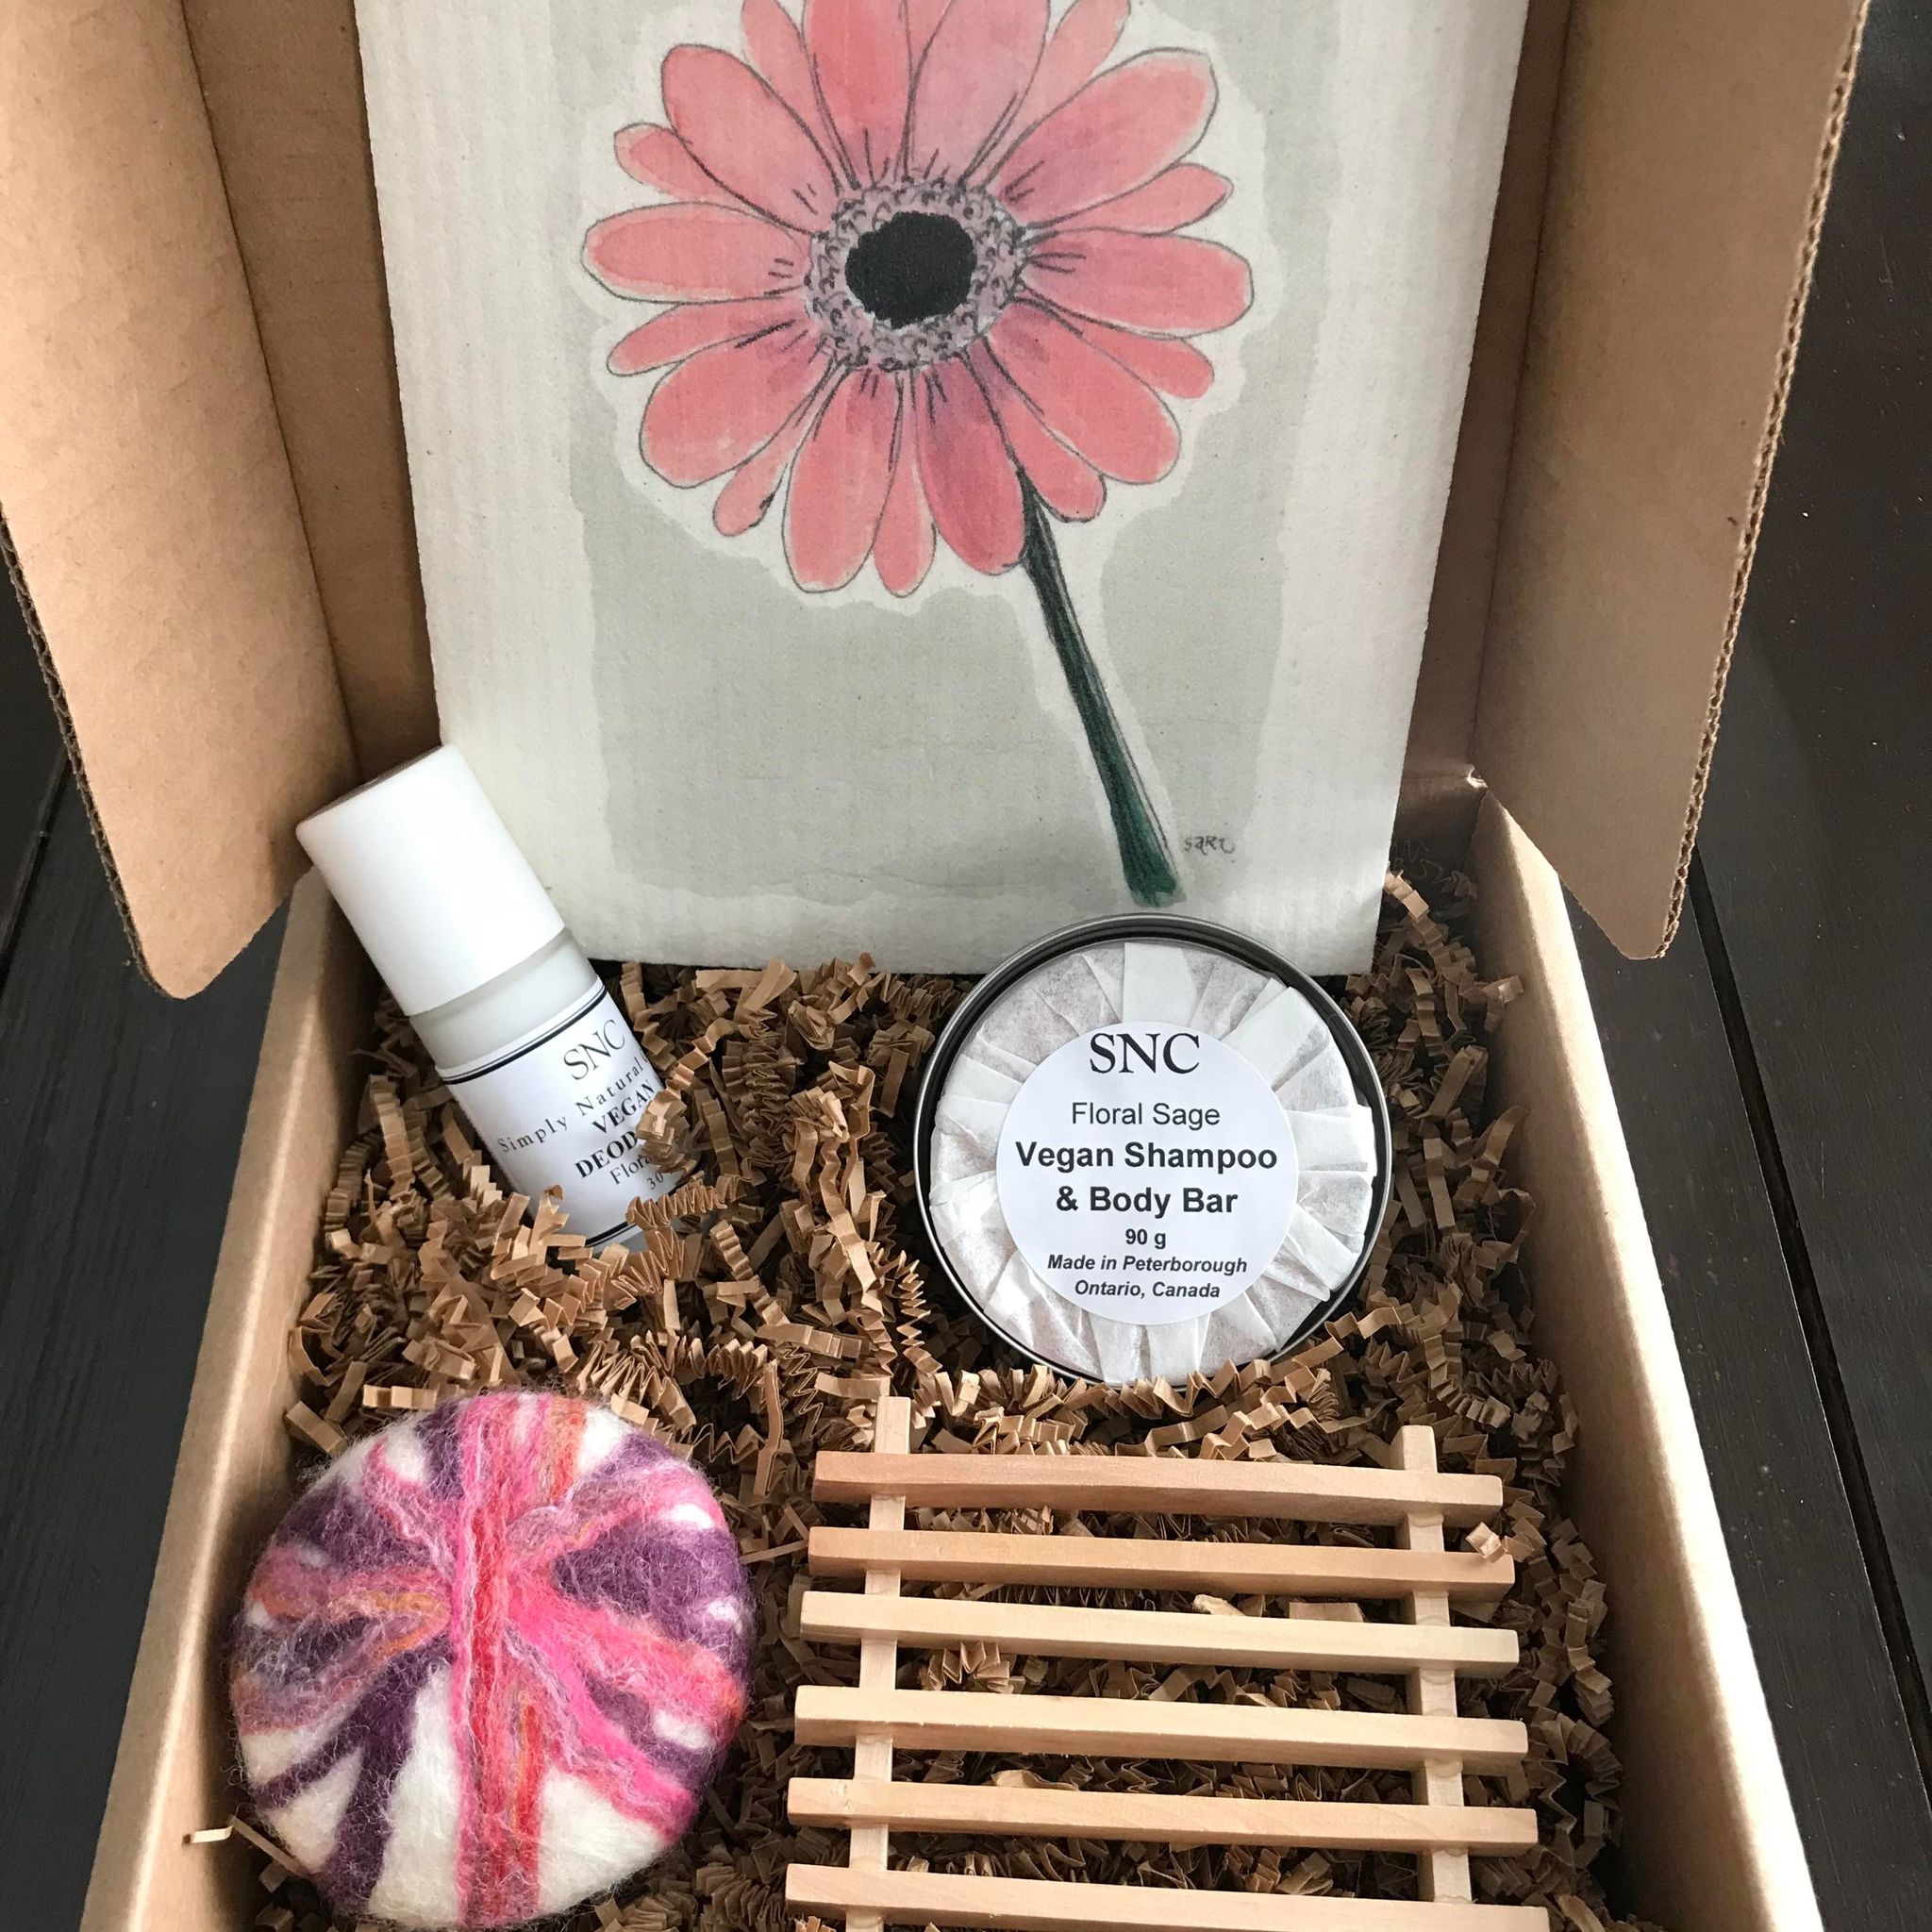 Canadian made Simply Natural Canada handcrafted floral sage essential oil felted soap shampoo bar and natural deodorant gift set with More Joy Swedish sponge cloth in a pink gerbera daisy pattern